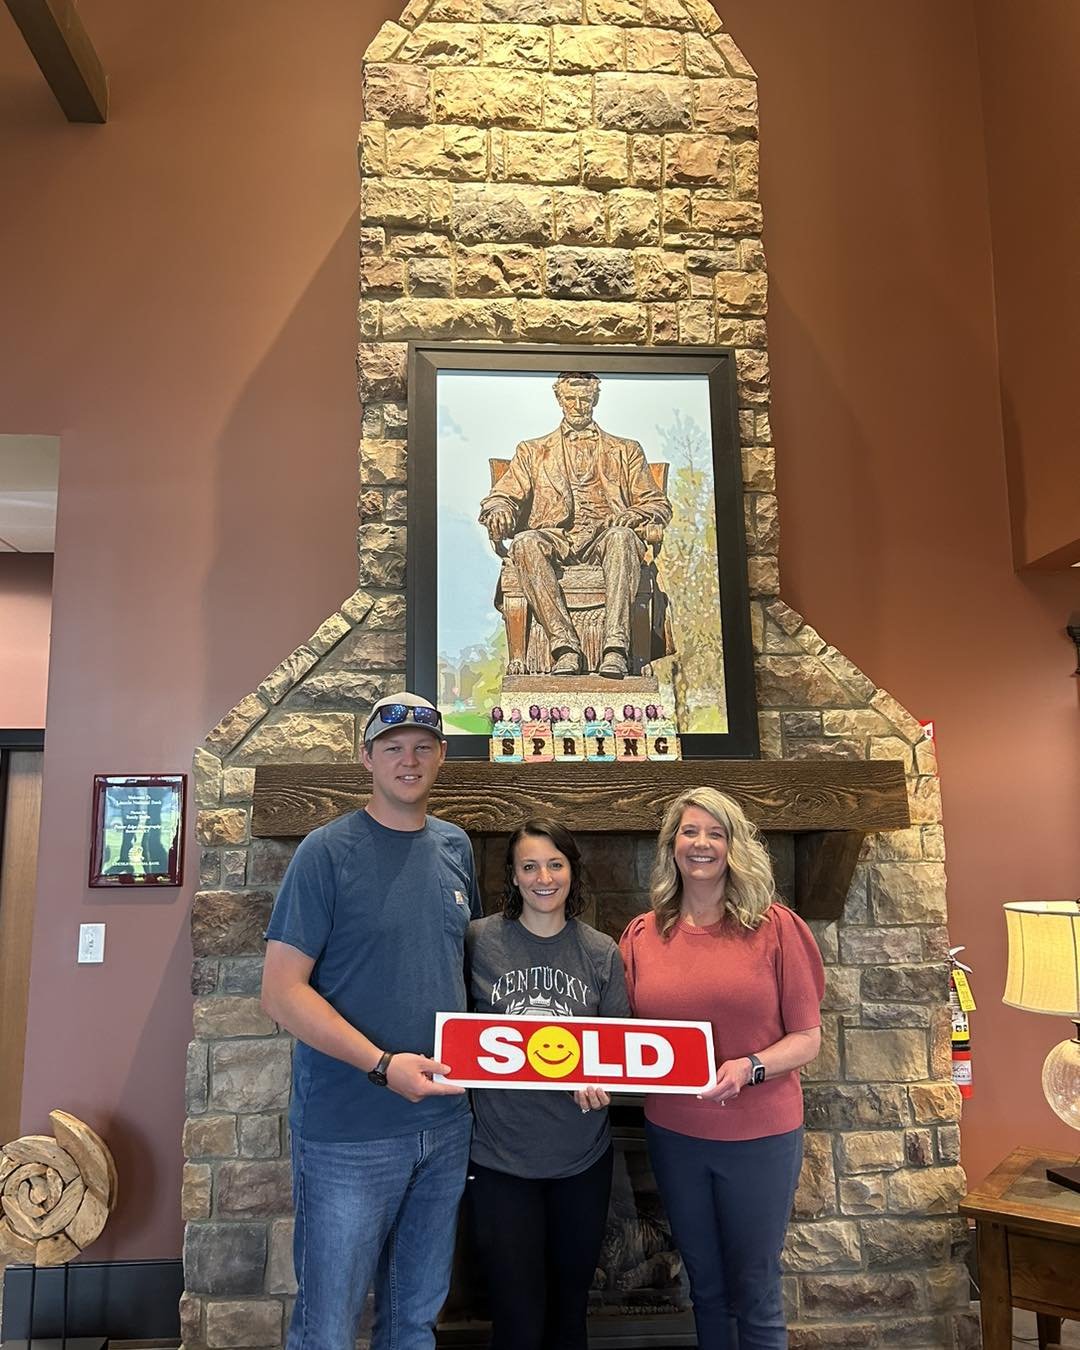 🎊🎉 CONGRATS! 🎉 CONGRATS! 🎉🎊 Let&rsquo;s ALL say a BIG CONGRATULATIONS 
to Tyler &amp; Kelli on the purchase of their beautiful new 🏡! It was our pleasure to assist you and we hope you enjoy many happy years in your new home 🏡! 

Many thanks to